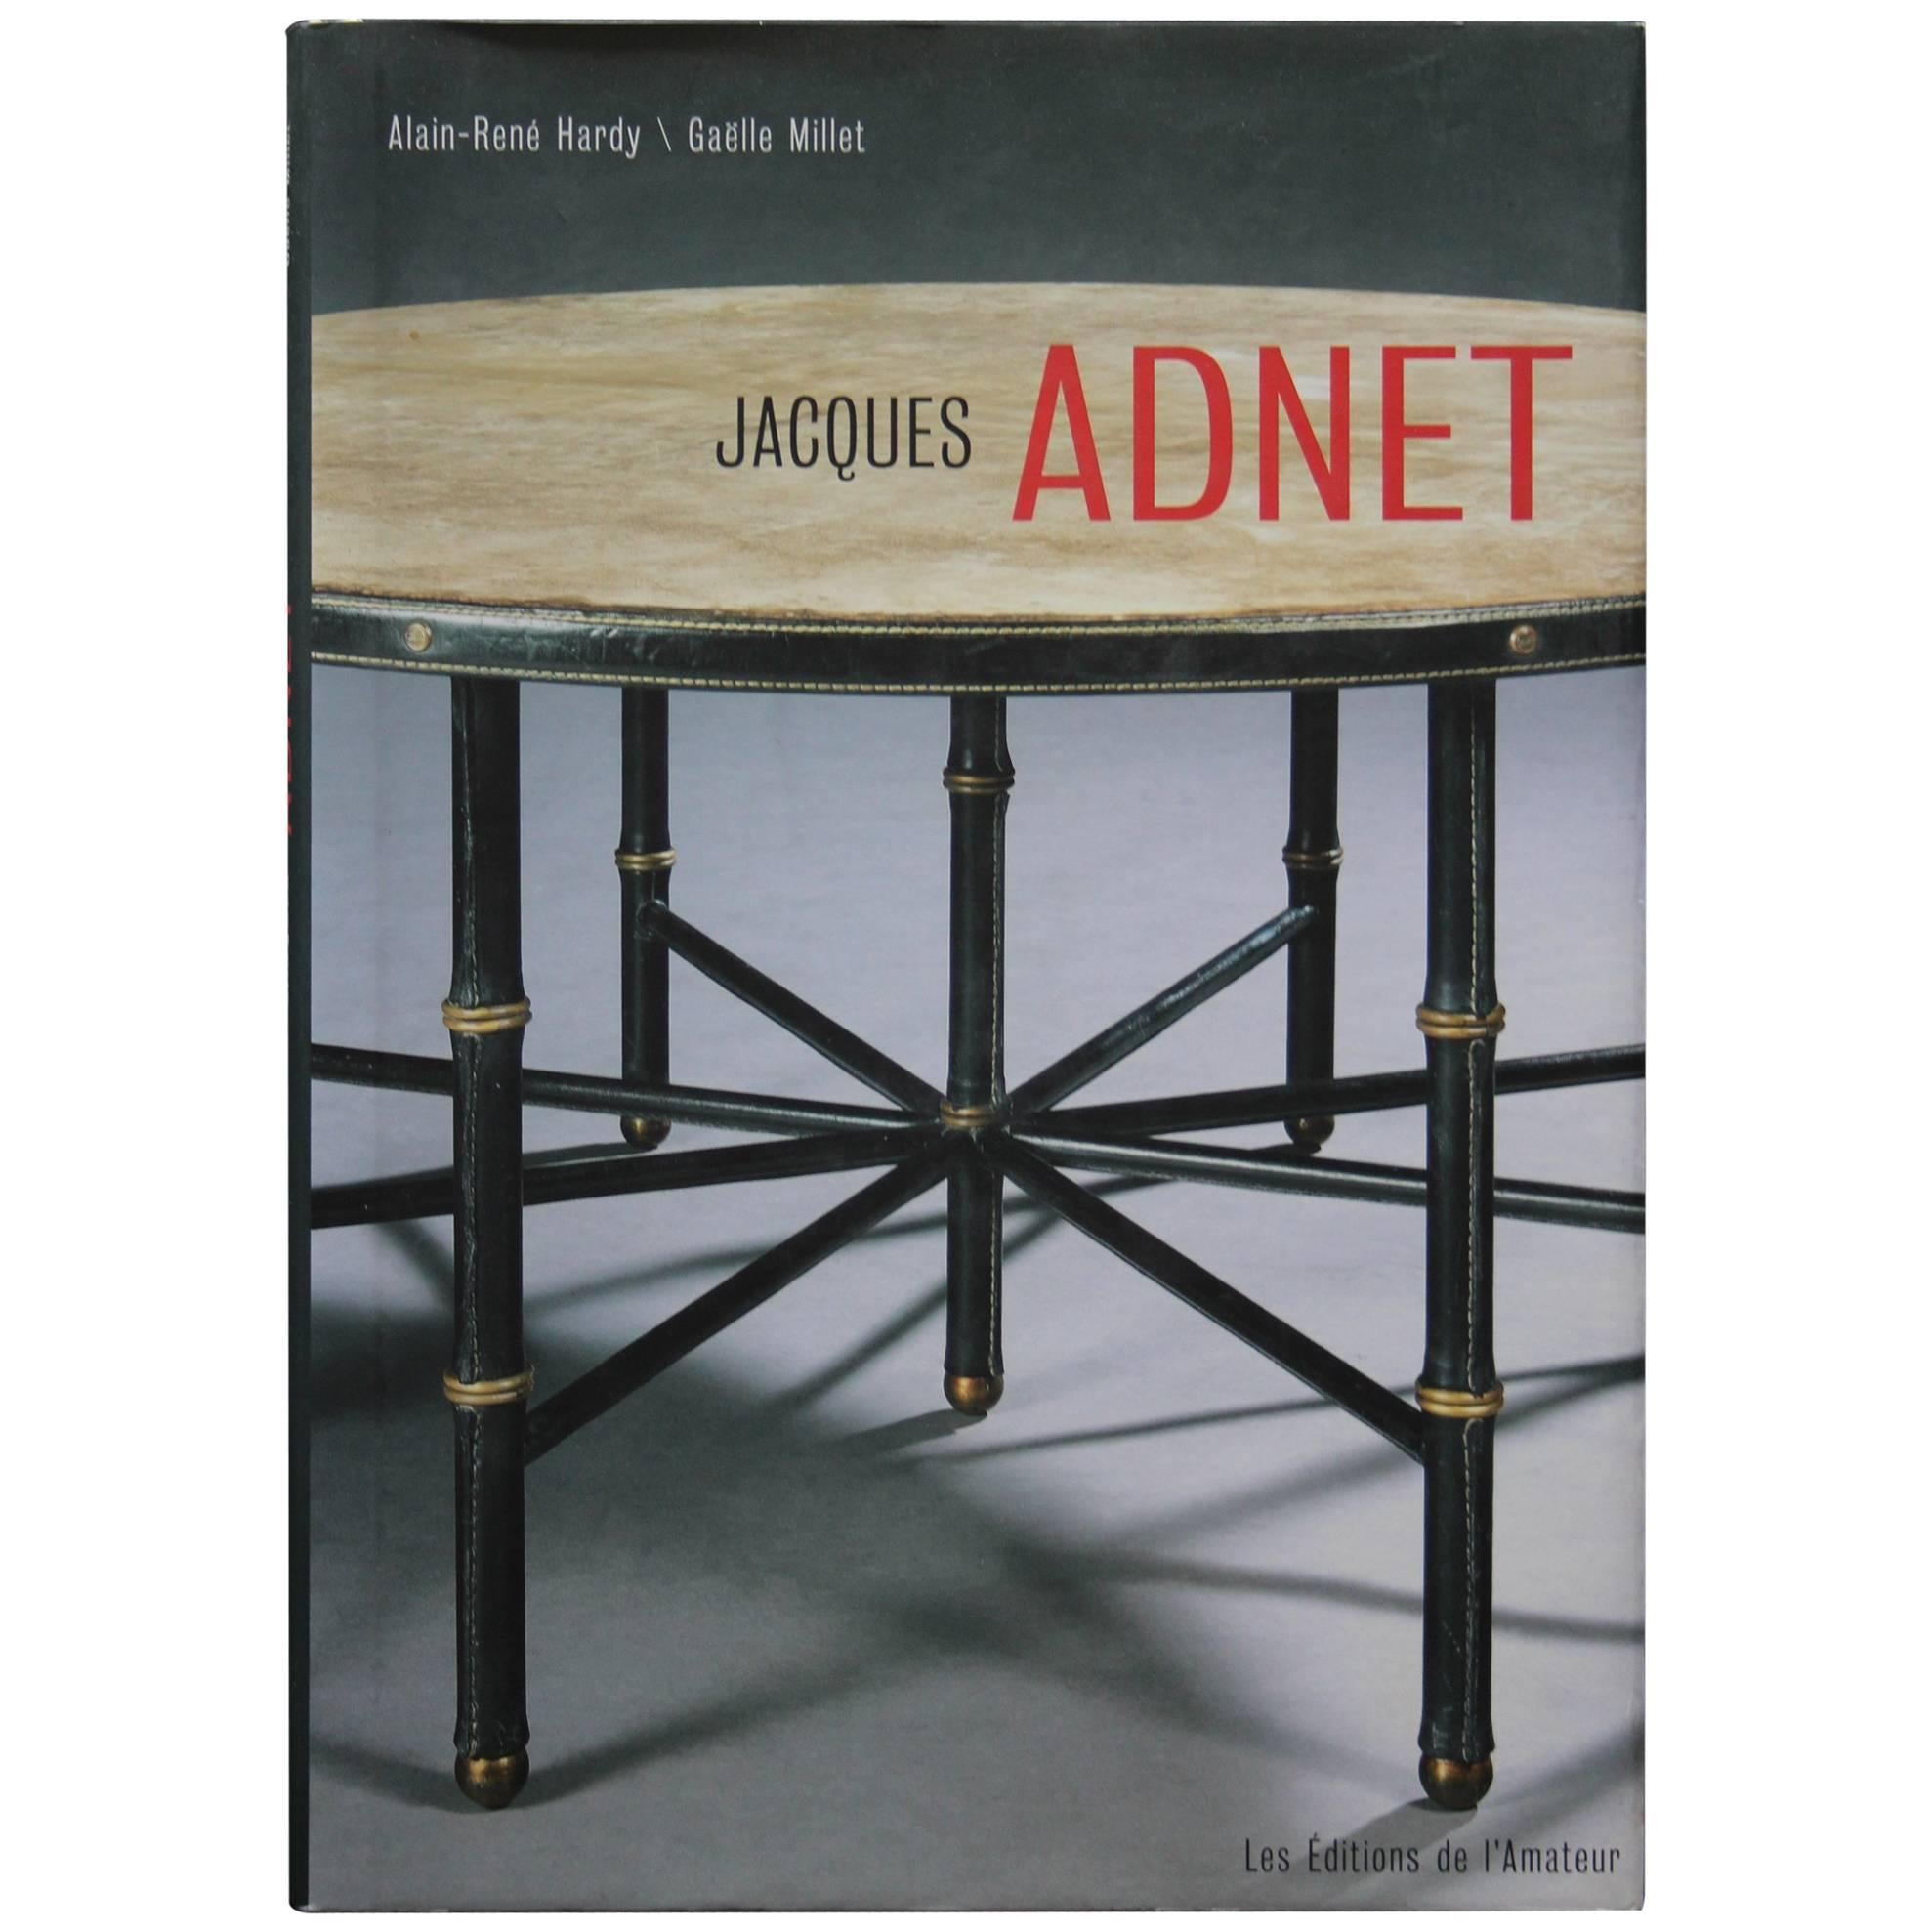 "Jacques Adnet" Book